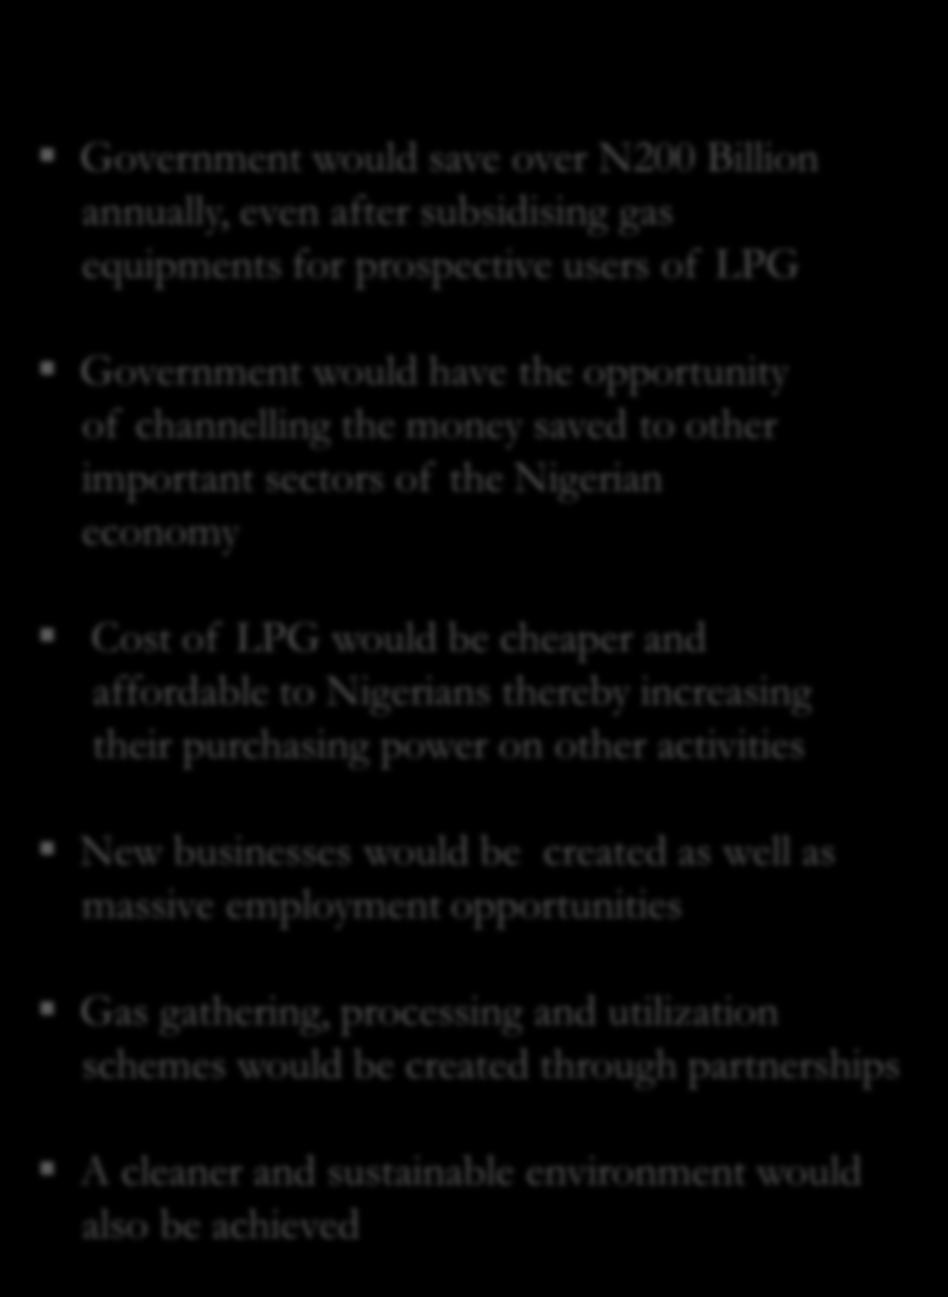 IF INCENTIVES ON LPG EQUIPMENTS ARE PROVIDED THE IDEAL SITUATION Expect Result Government would save over N200 Billion annually, even after subsidising gas equipments for prospective users of LPG No